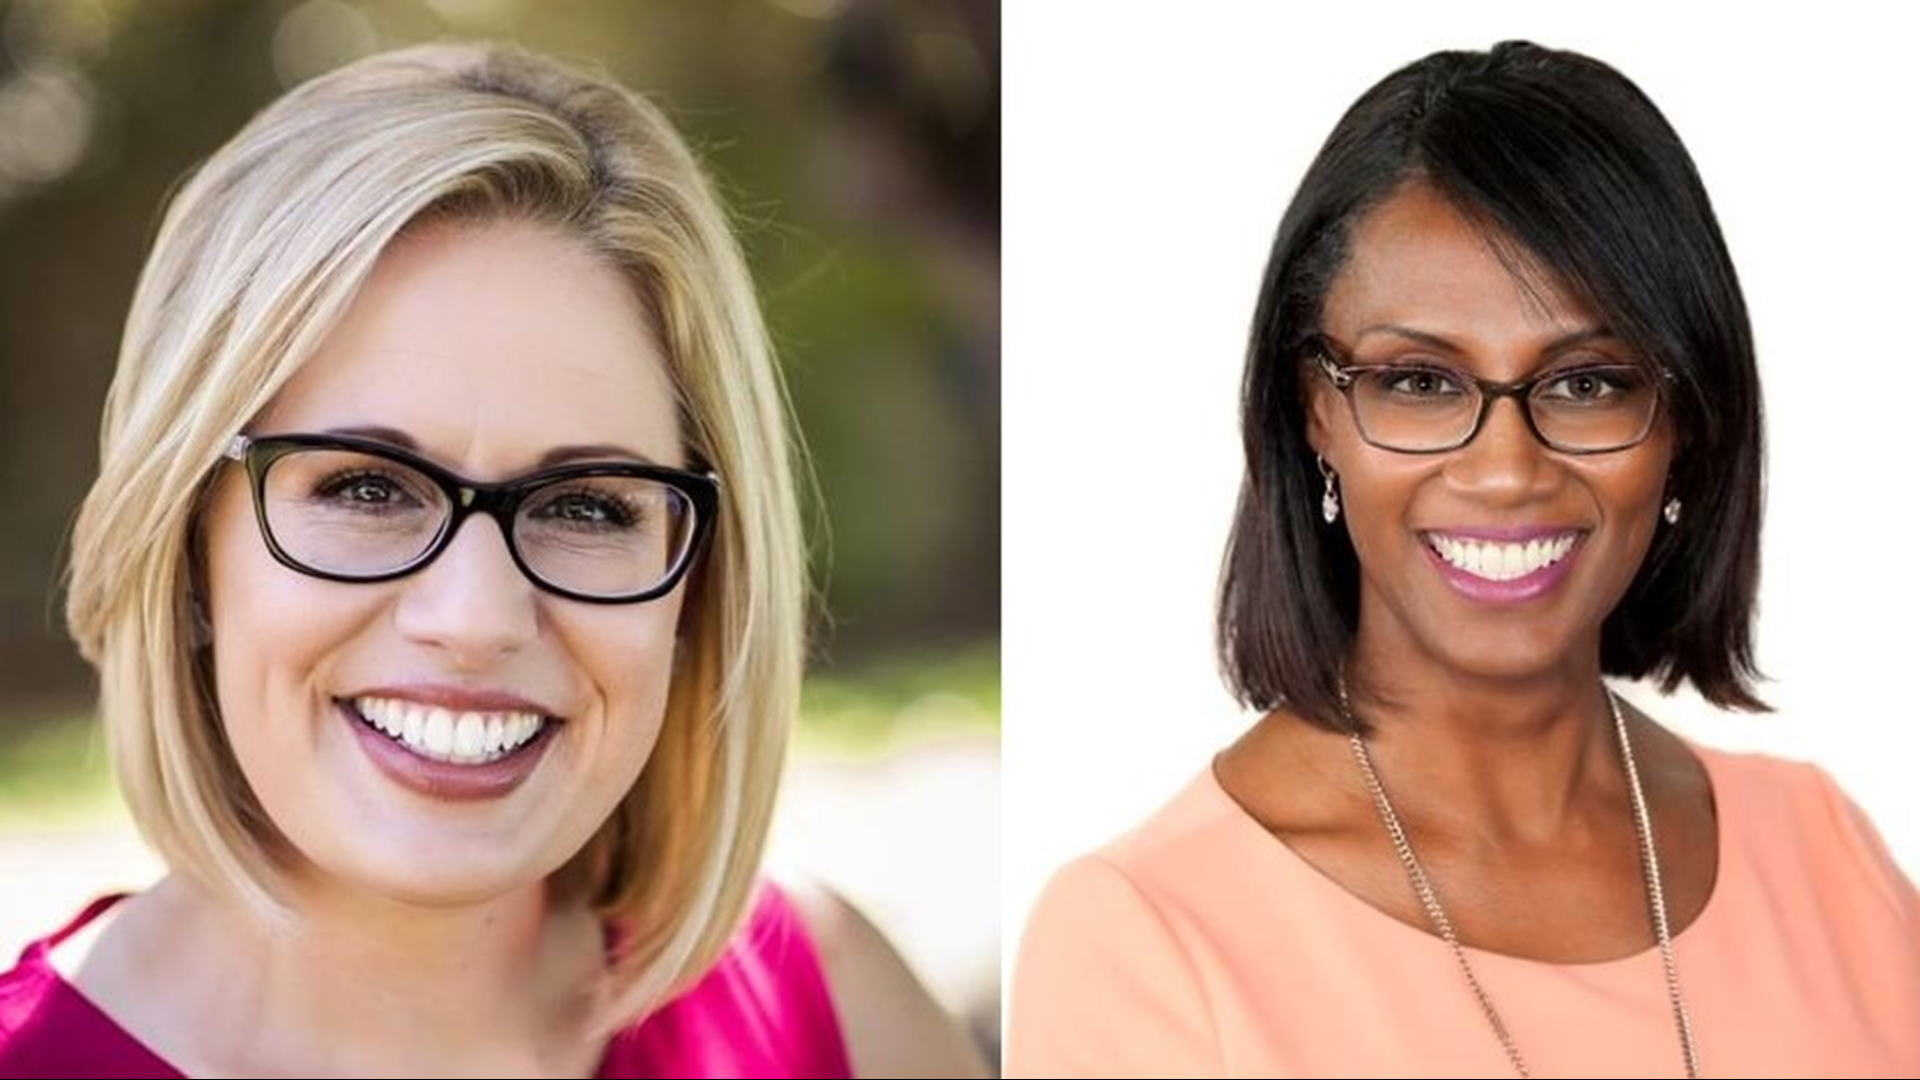 The decision, just five days before the election, could remove a potential obstacle for Sinema in her toss-up race against Republican Congresswoman Martha McSally.